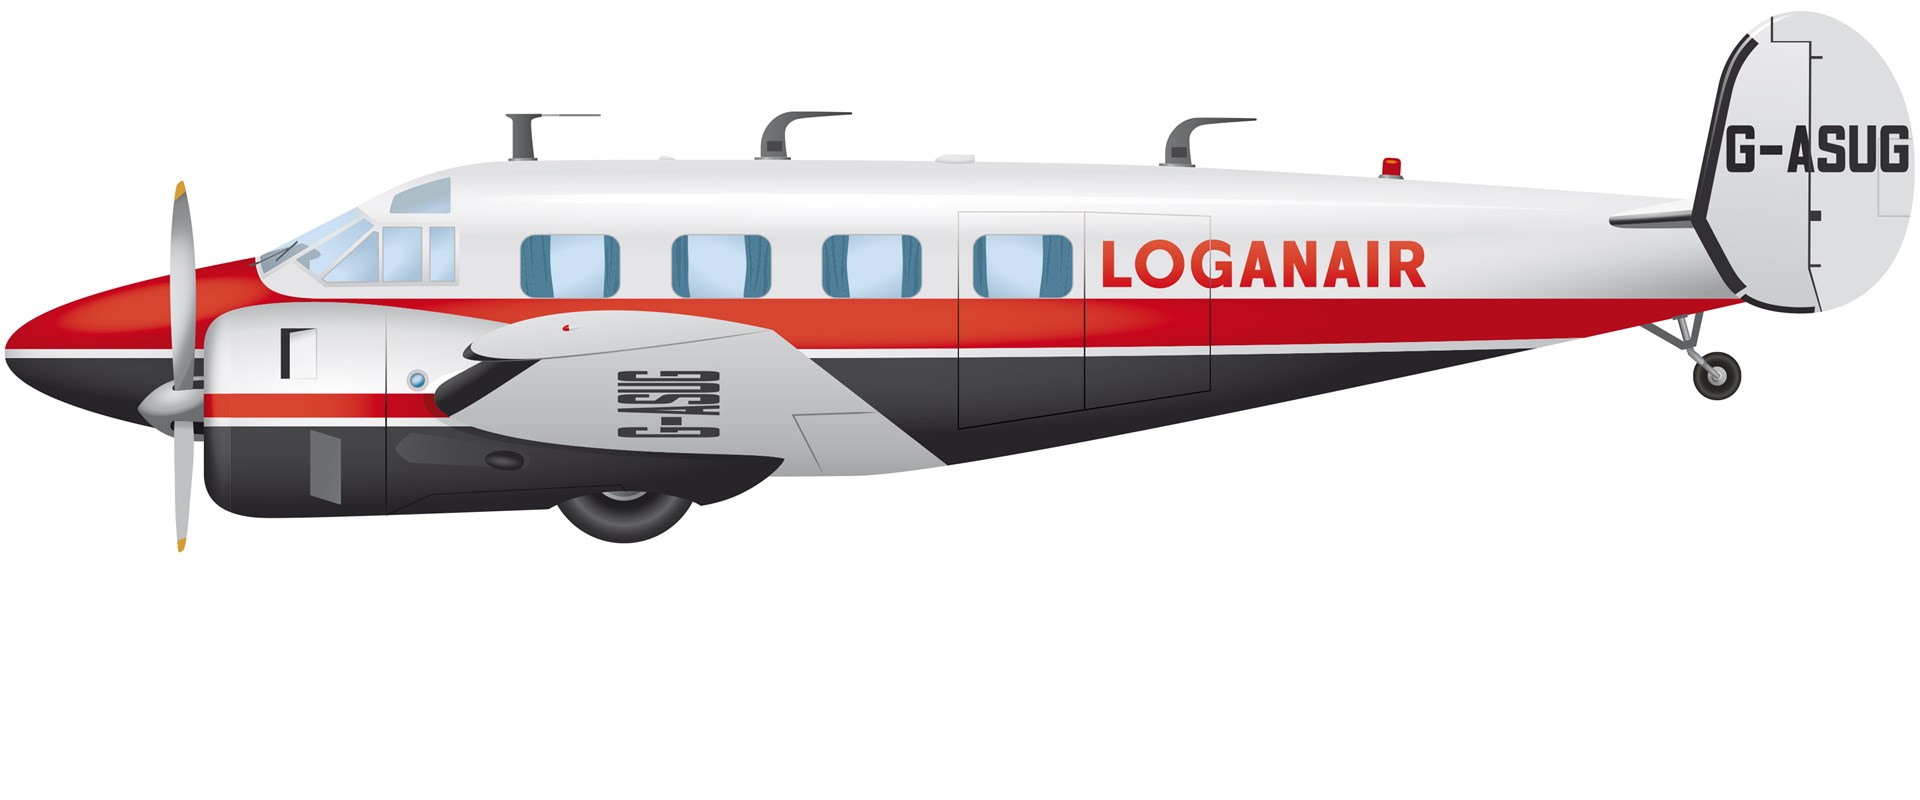 Beech E-18S aircraft with black and red stripes. The side of the plane reads "Loganair". 